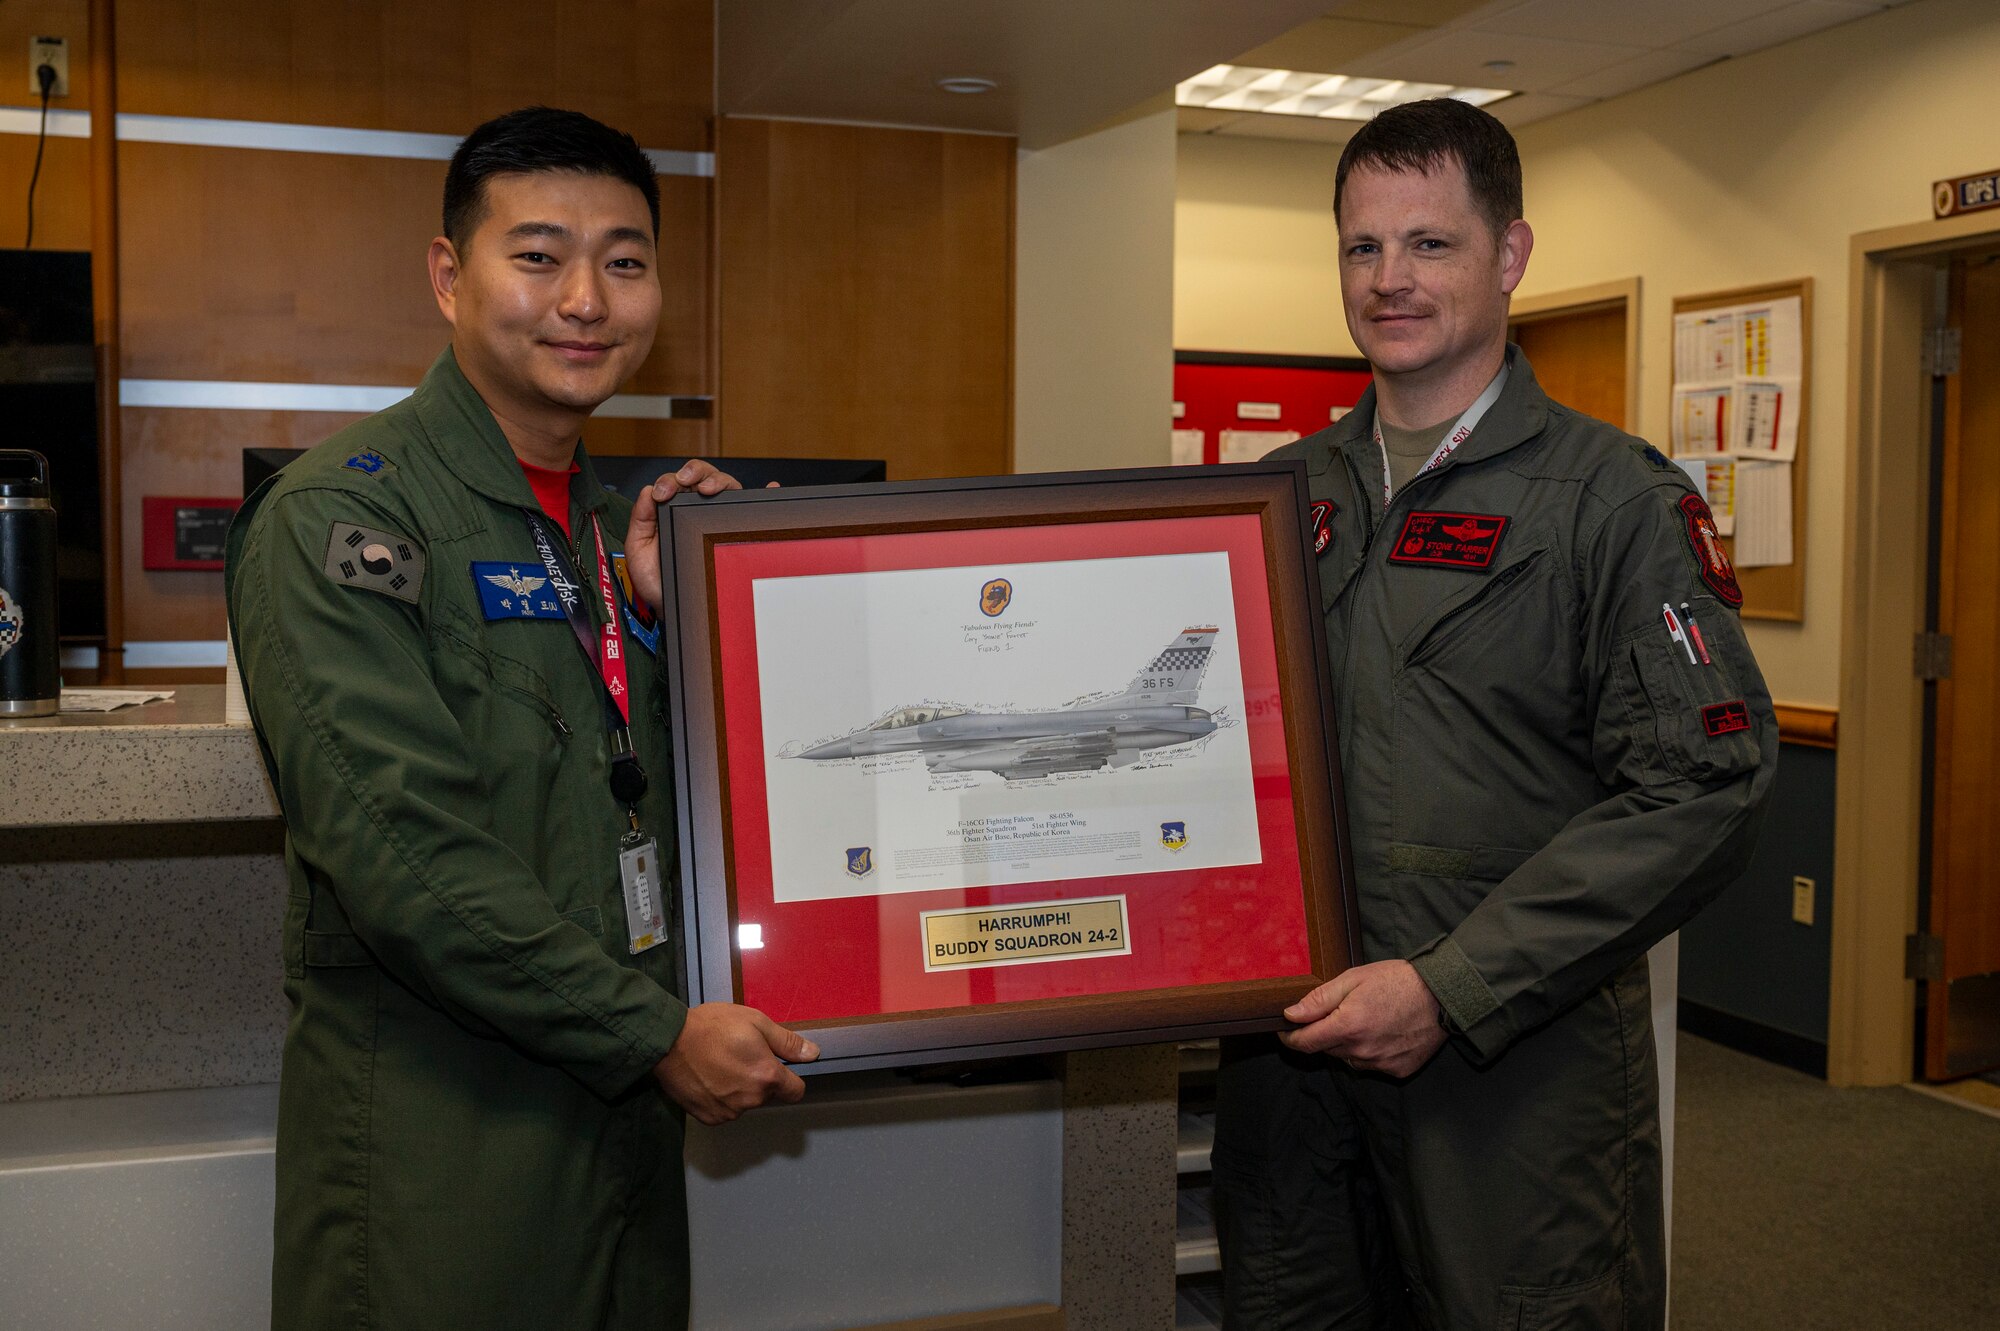 U.S. Air Force Lt. Col. Farrer, 36th Fighter Squadron commander, presents a plaque to Republic of Korea Air Force Maj. Youngdo Park, 122nd FS vice commander, closing Buddy Squadron 24-2 at Osan Air Base Republic of Korea, March 8, 2024. ROKAF pilots assigned to the 122nd FS trained alongside the 36th FS assigned to Osan AB, and 35th FS assigned to Kunsan AB, ROK, during the week-long training event. The Buddy Squadron Program fosters objective-based training and improves interoperability between the U.S. and ROKAF fighter squadrons. (U.S. Air Force photo by Senior Airman Kaitlin Frazier)